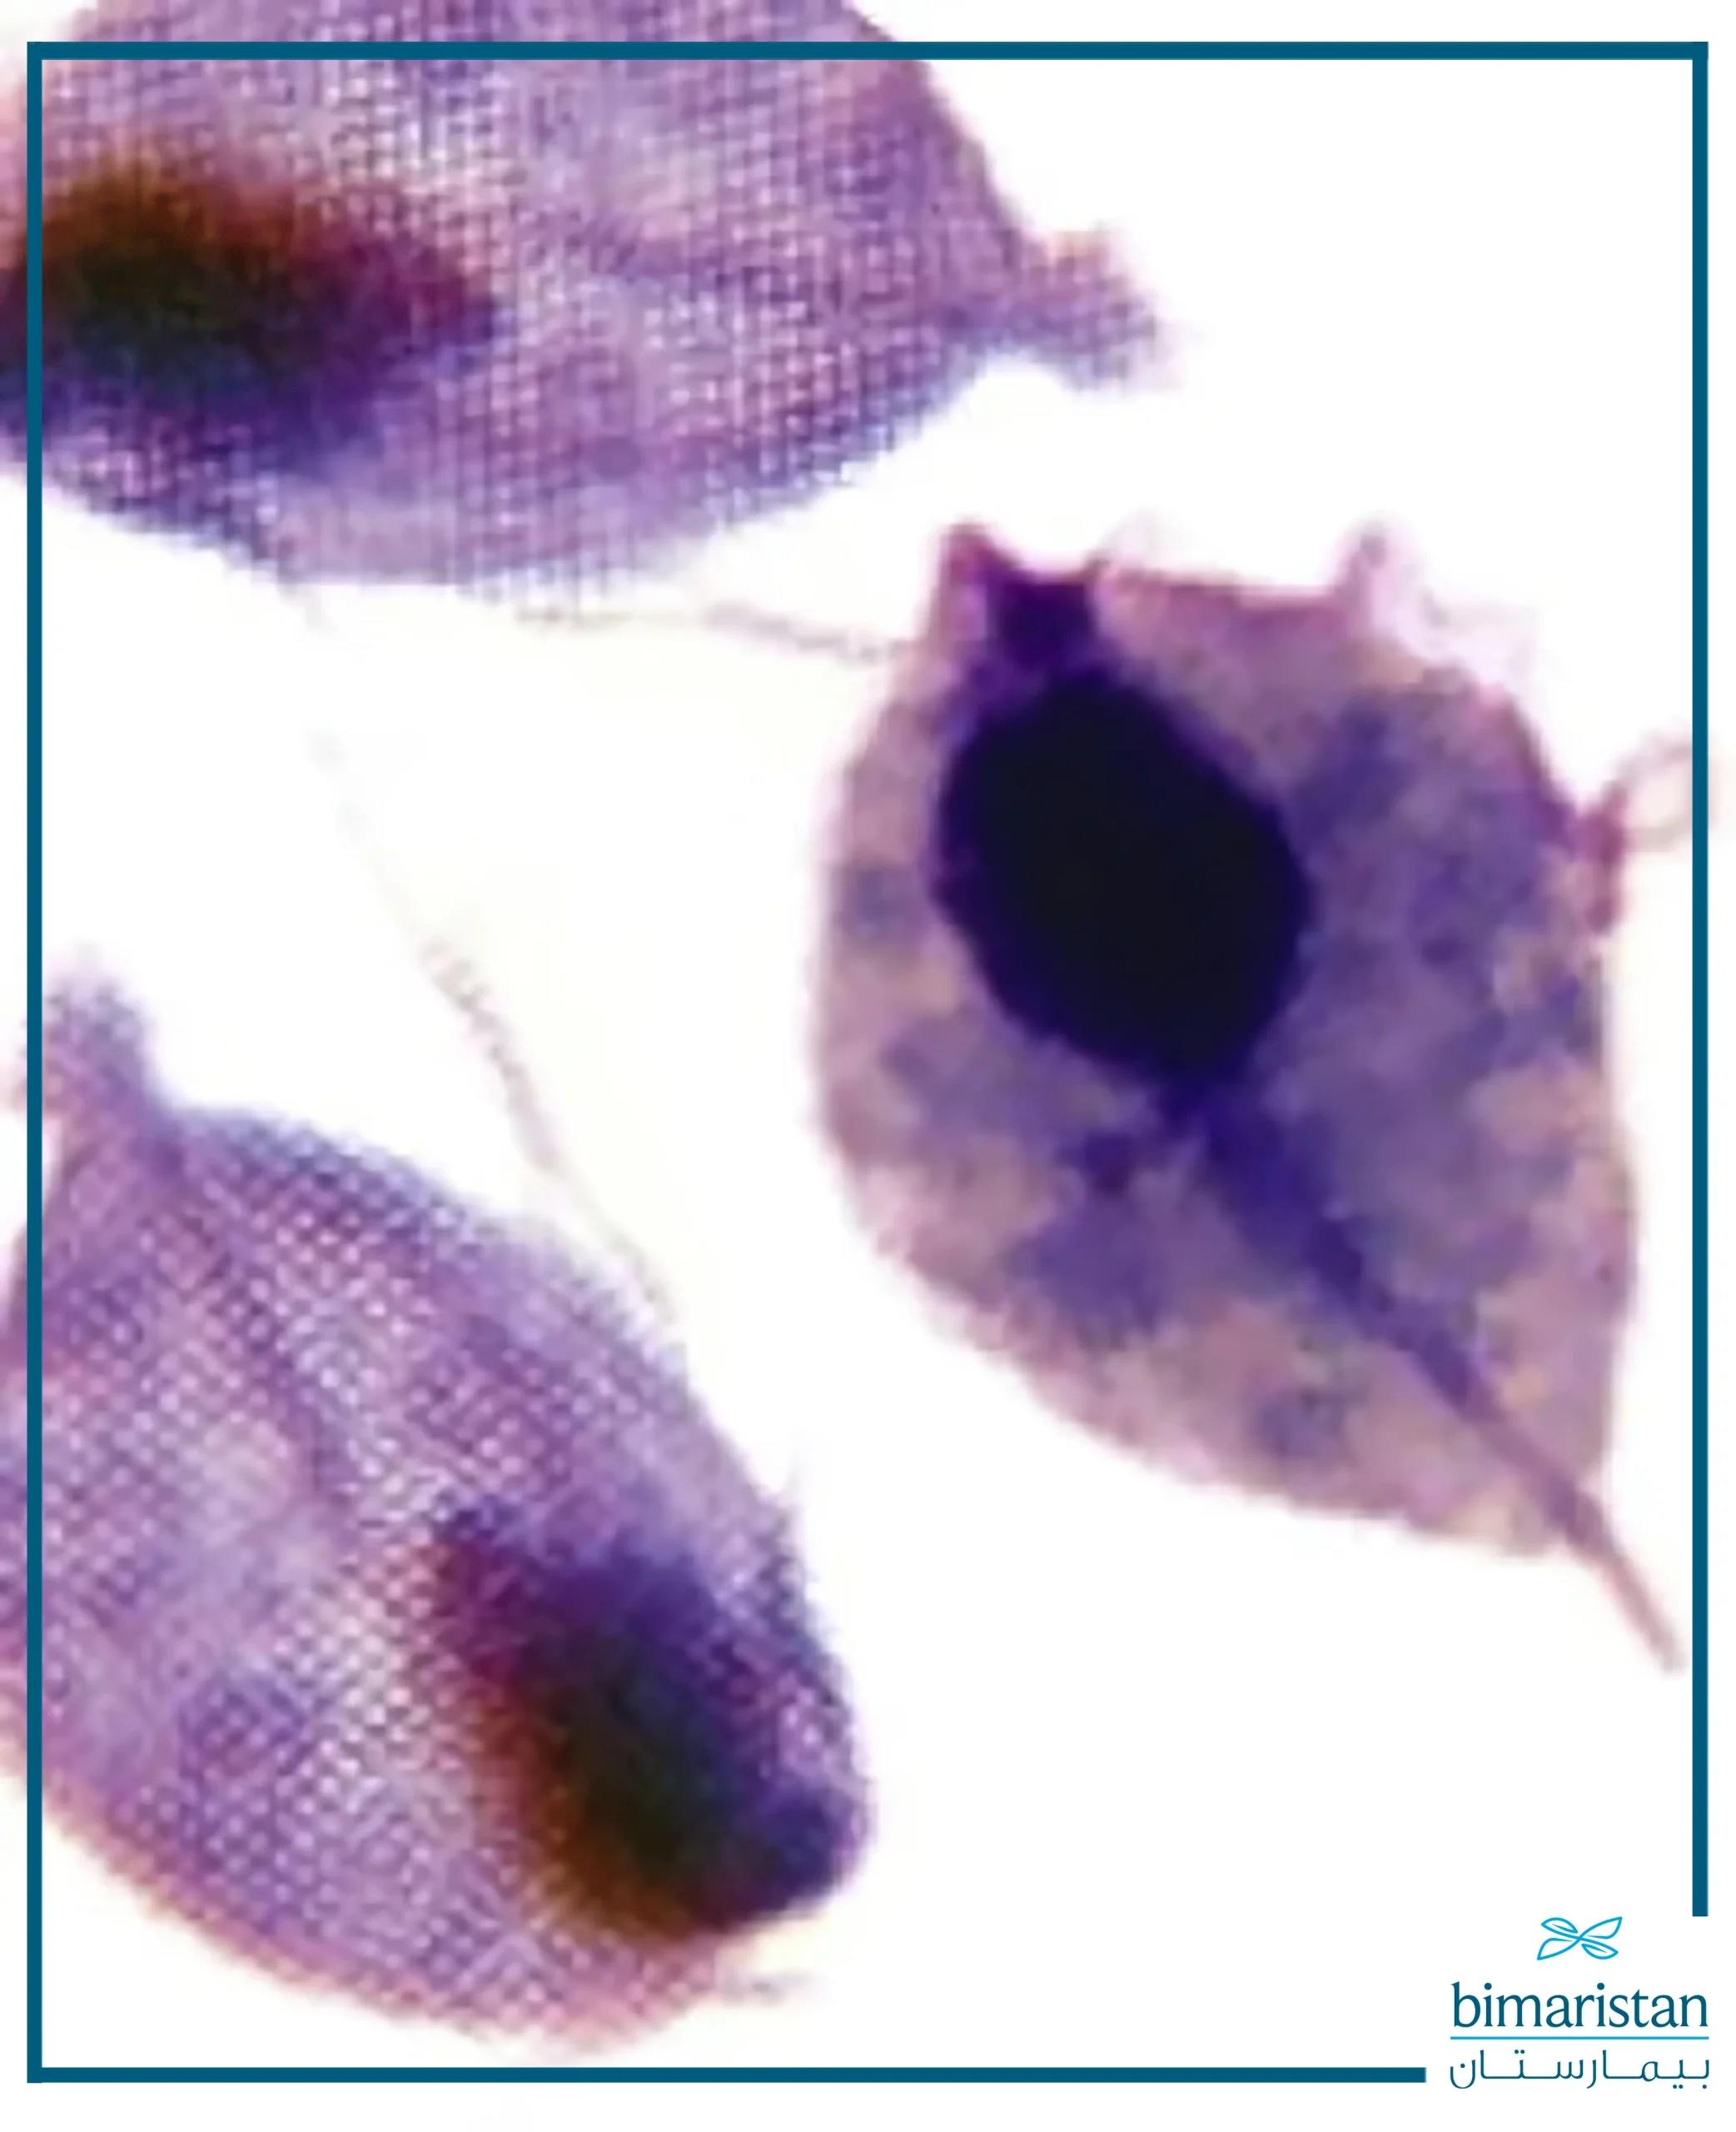 A picture illustrating trichomonas vaginalis under the microscope.